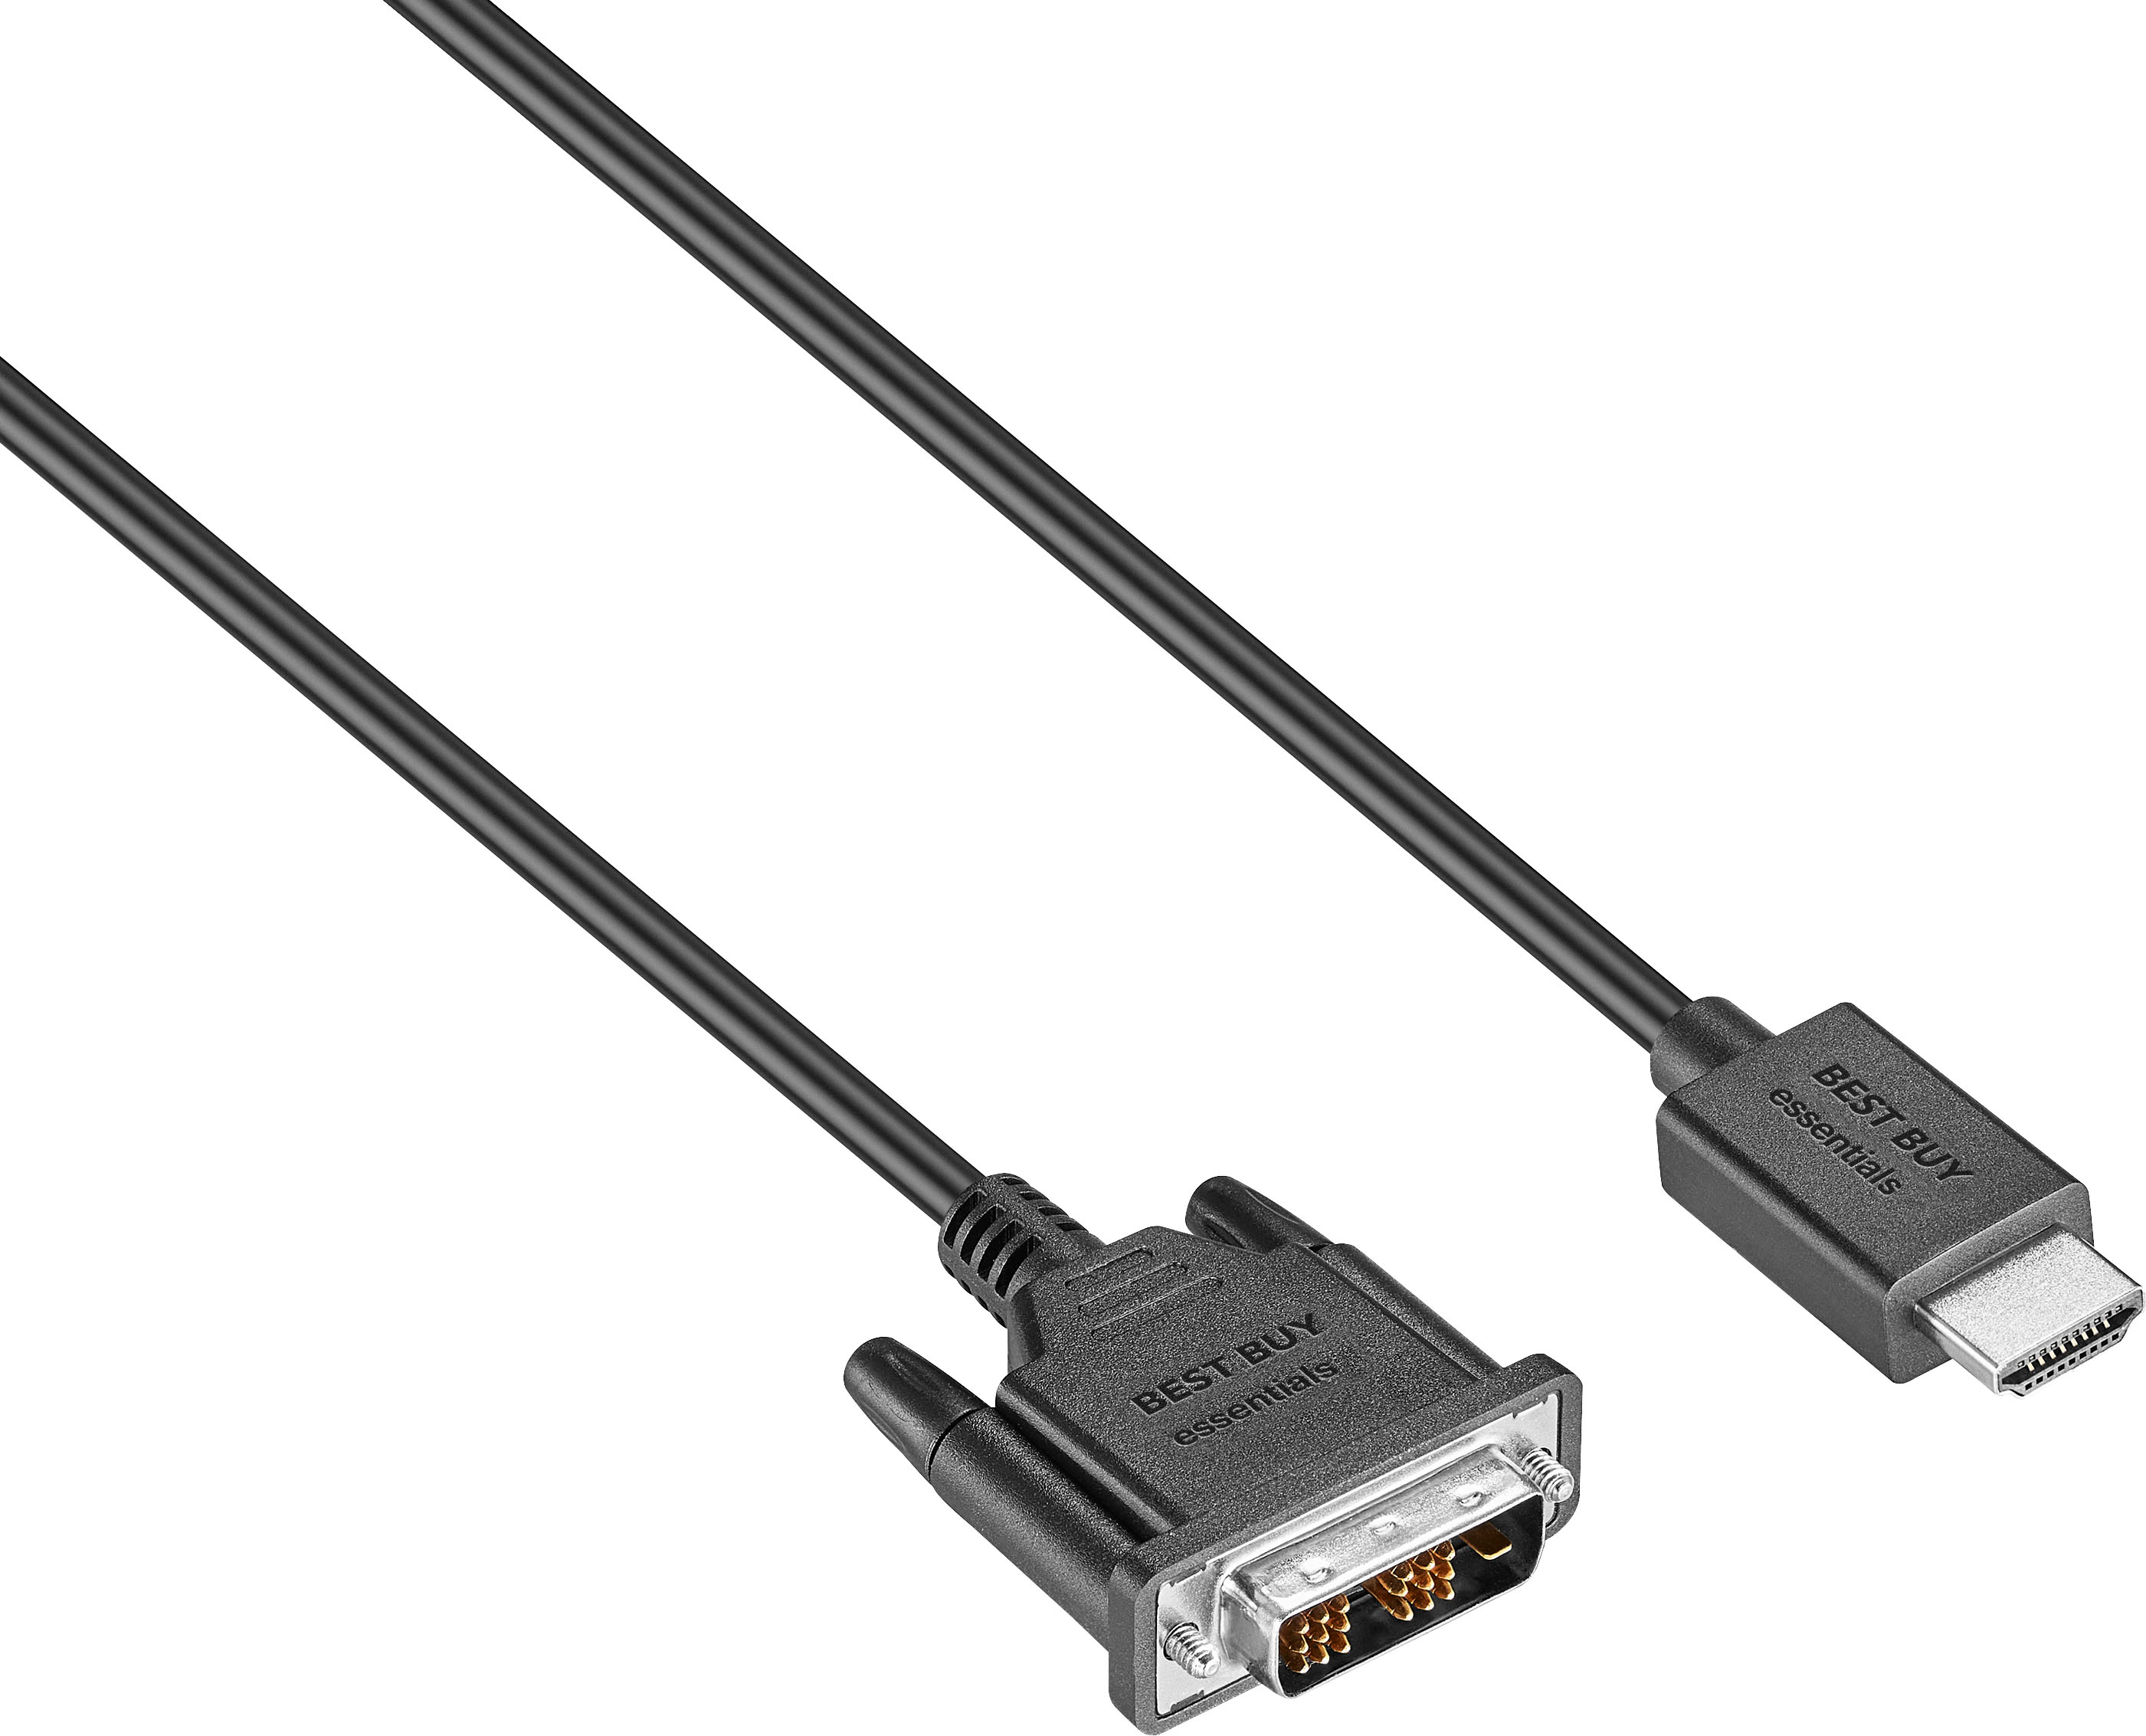 vga to hdmi cable - Best Buy